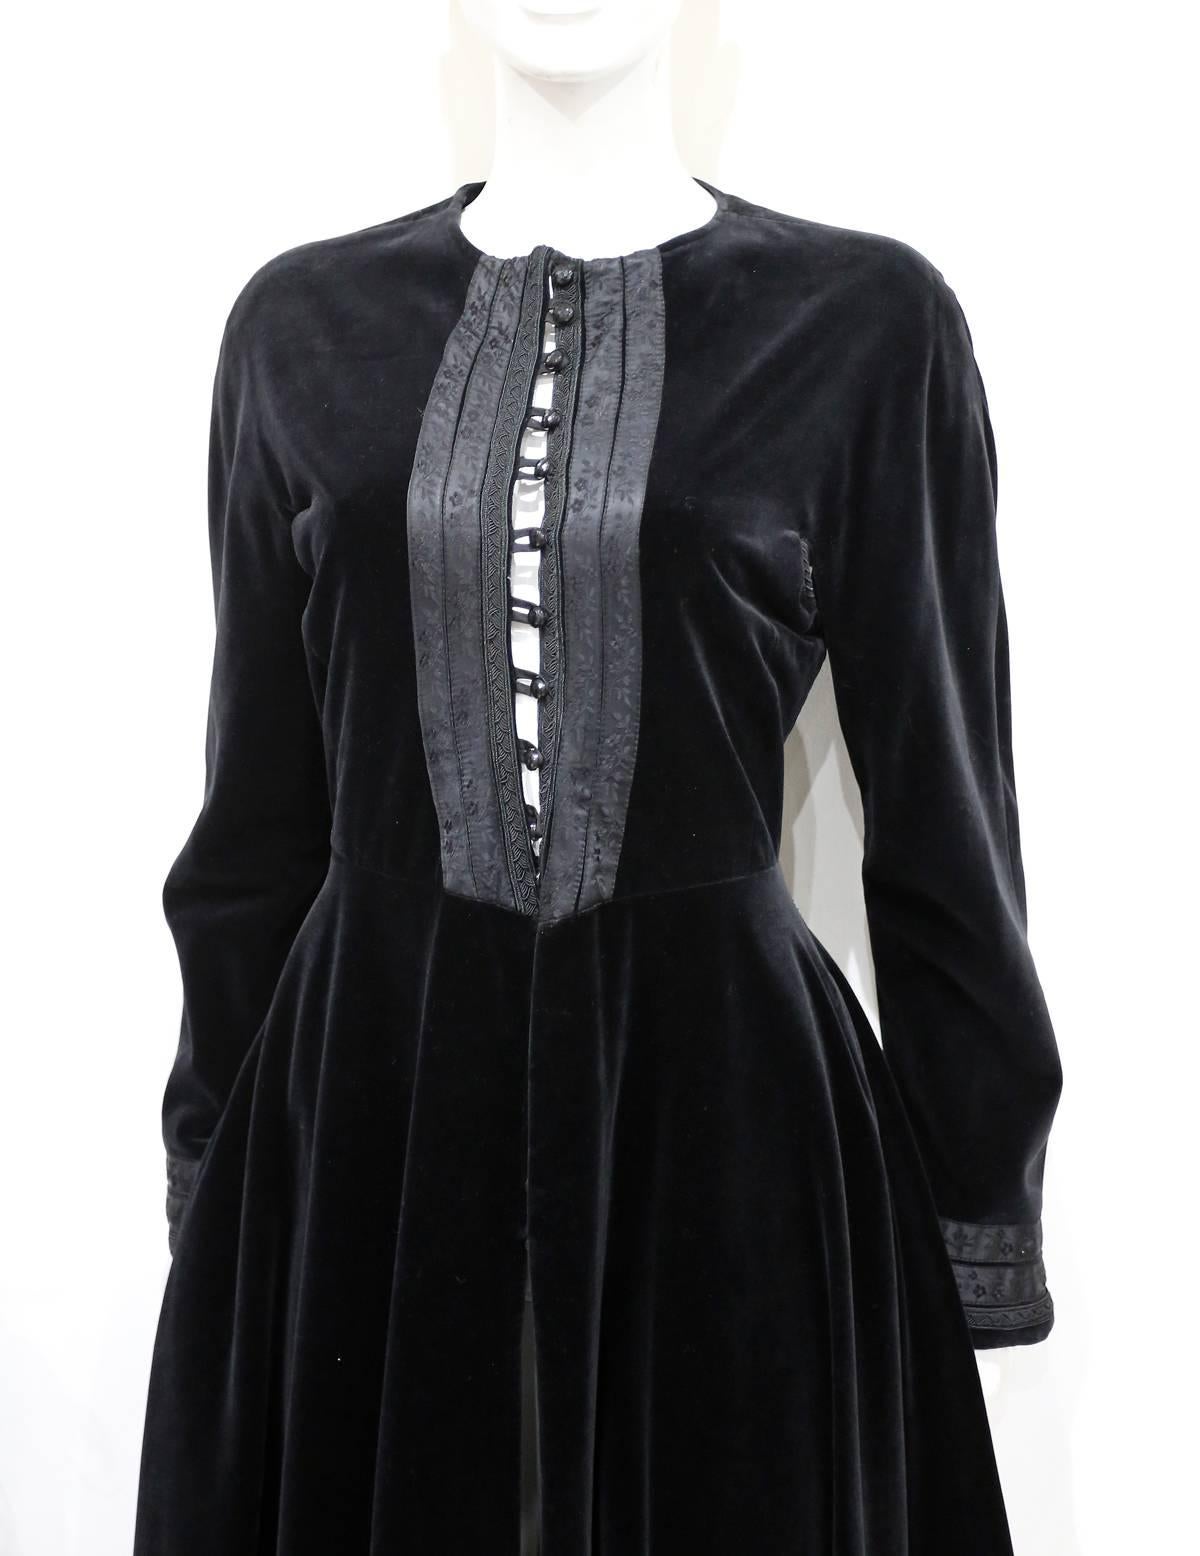 An early and rare Jean Paul Gaultier Russian inspired black velvet evening coat from the 1980s.

It 42 - Eu 38 - UK 10